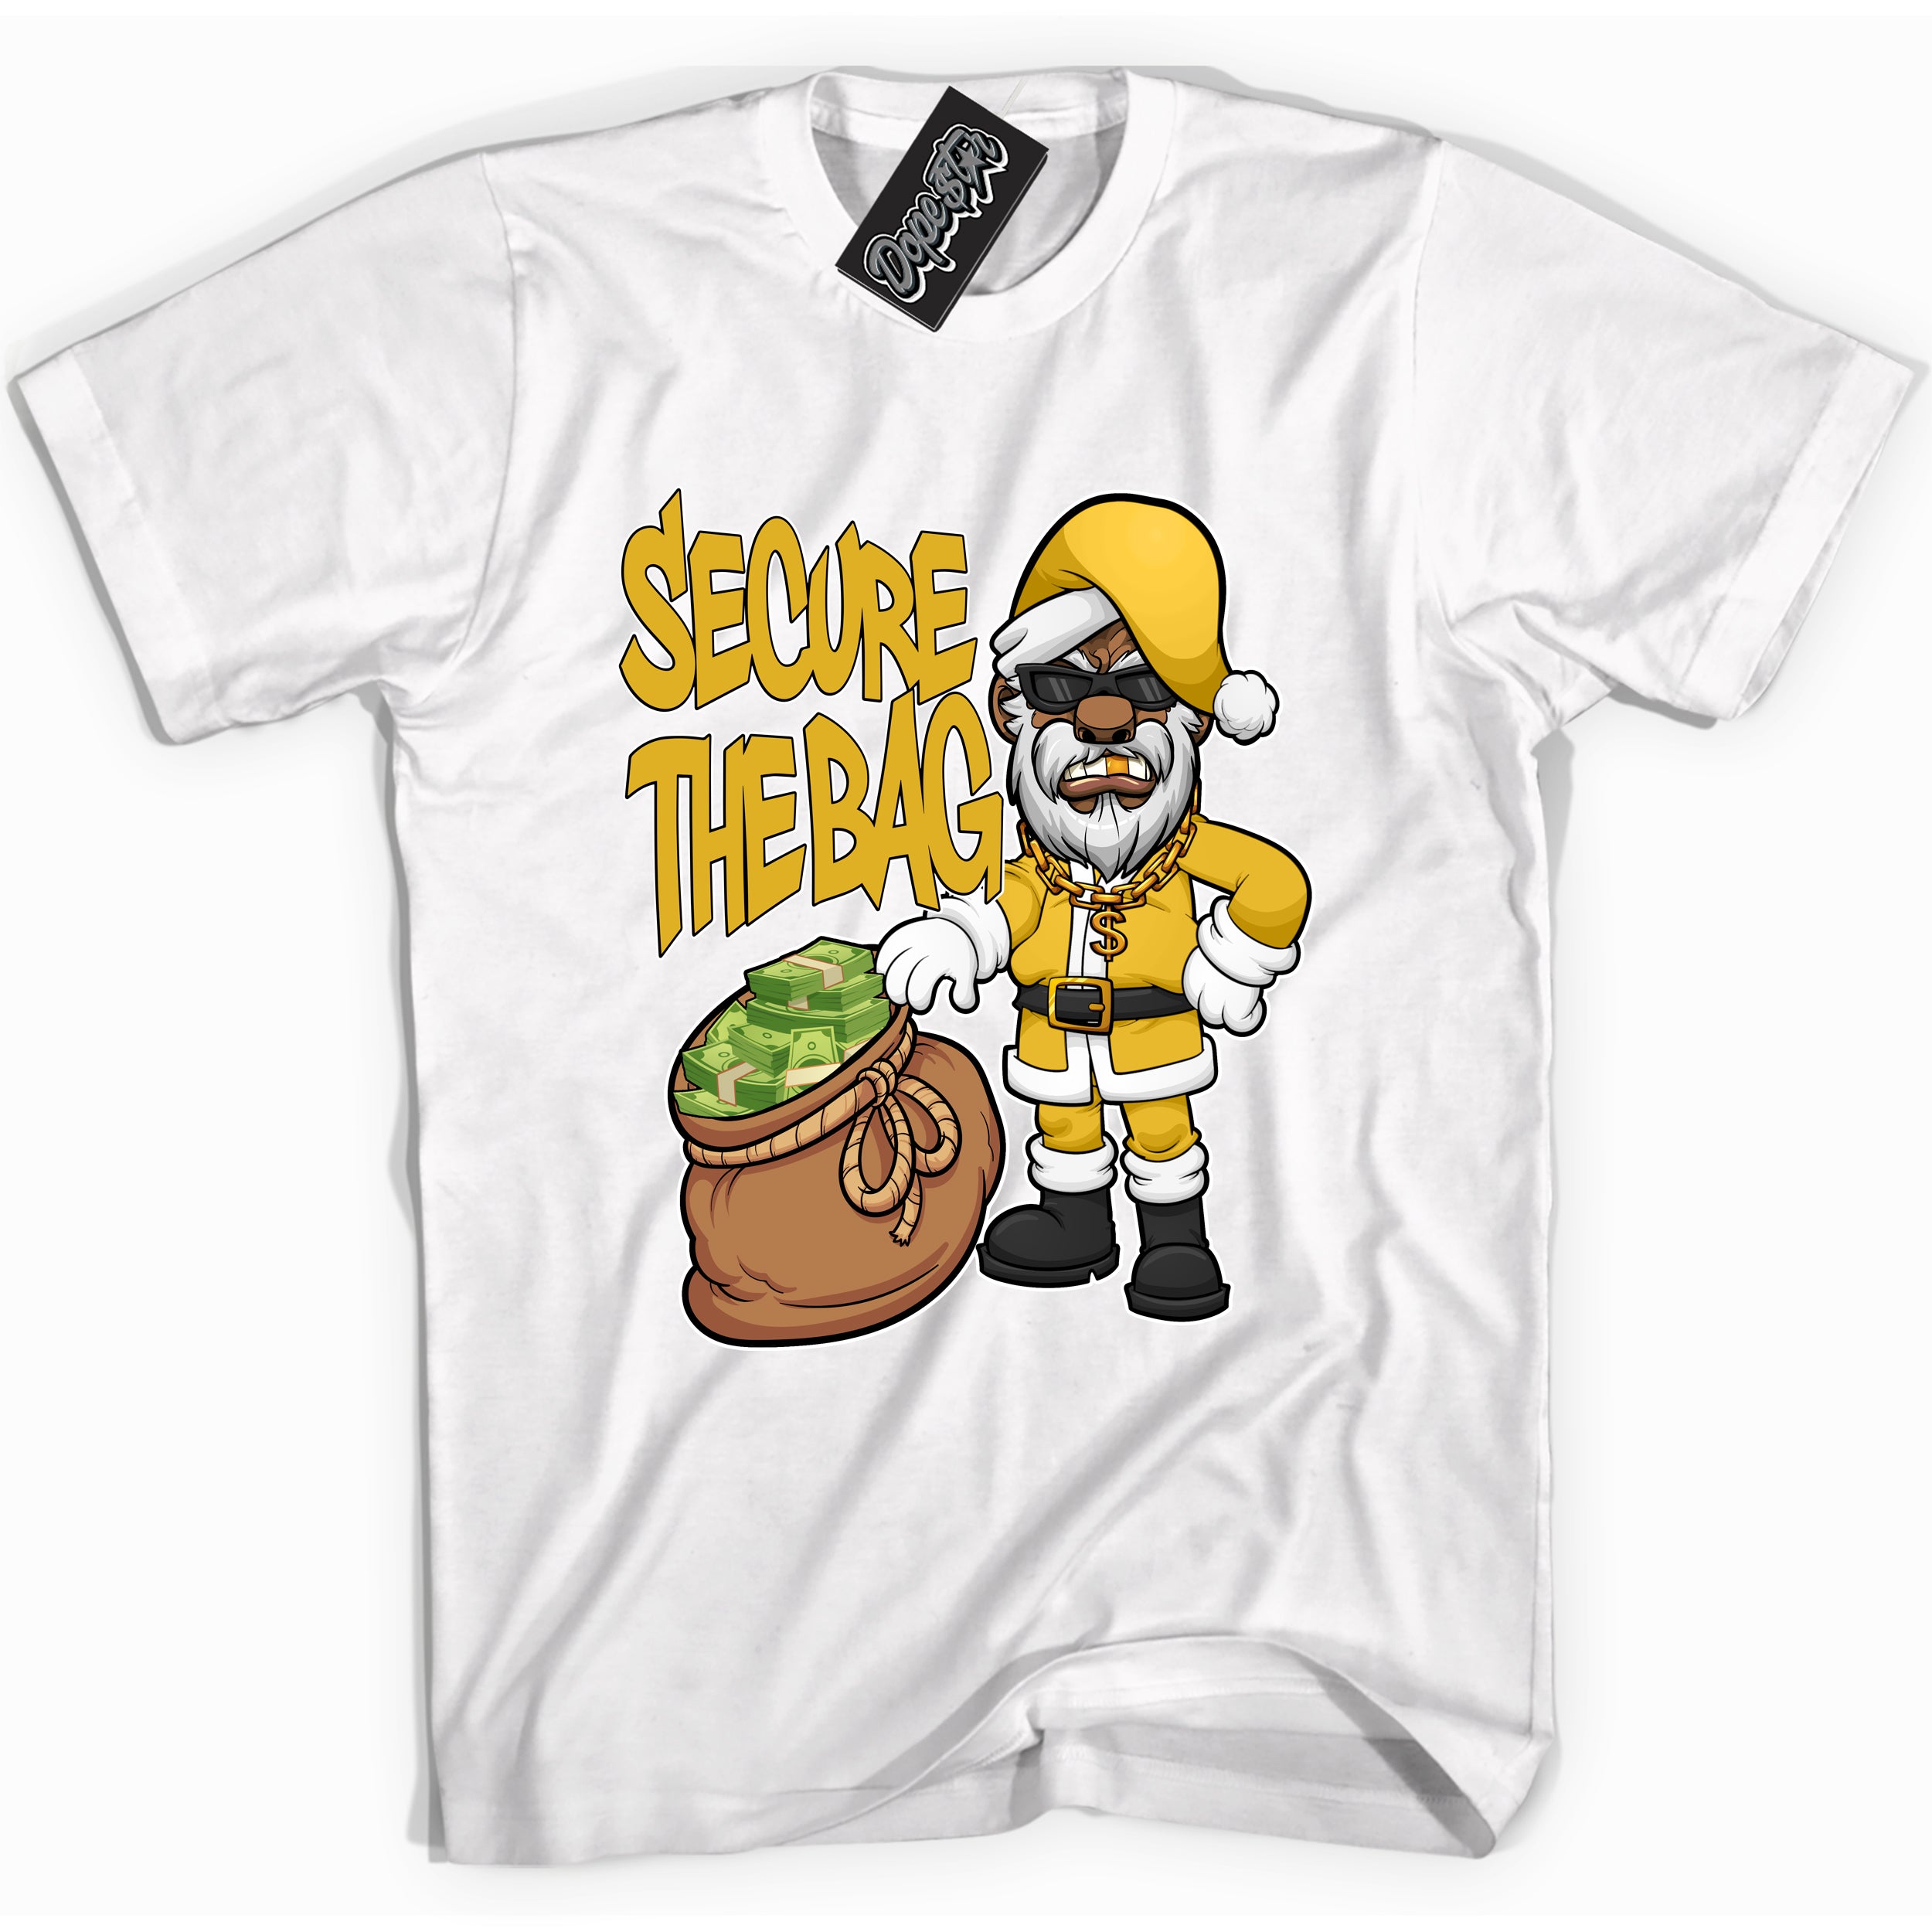 Cool White Shirt with “ Secure The Bag Santa” design that perfectly matches Yellow Ochre 6s Sneakers.